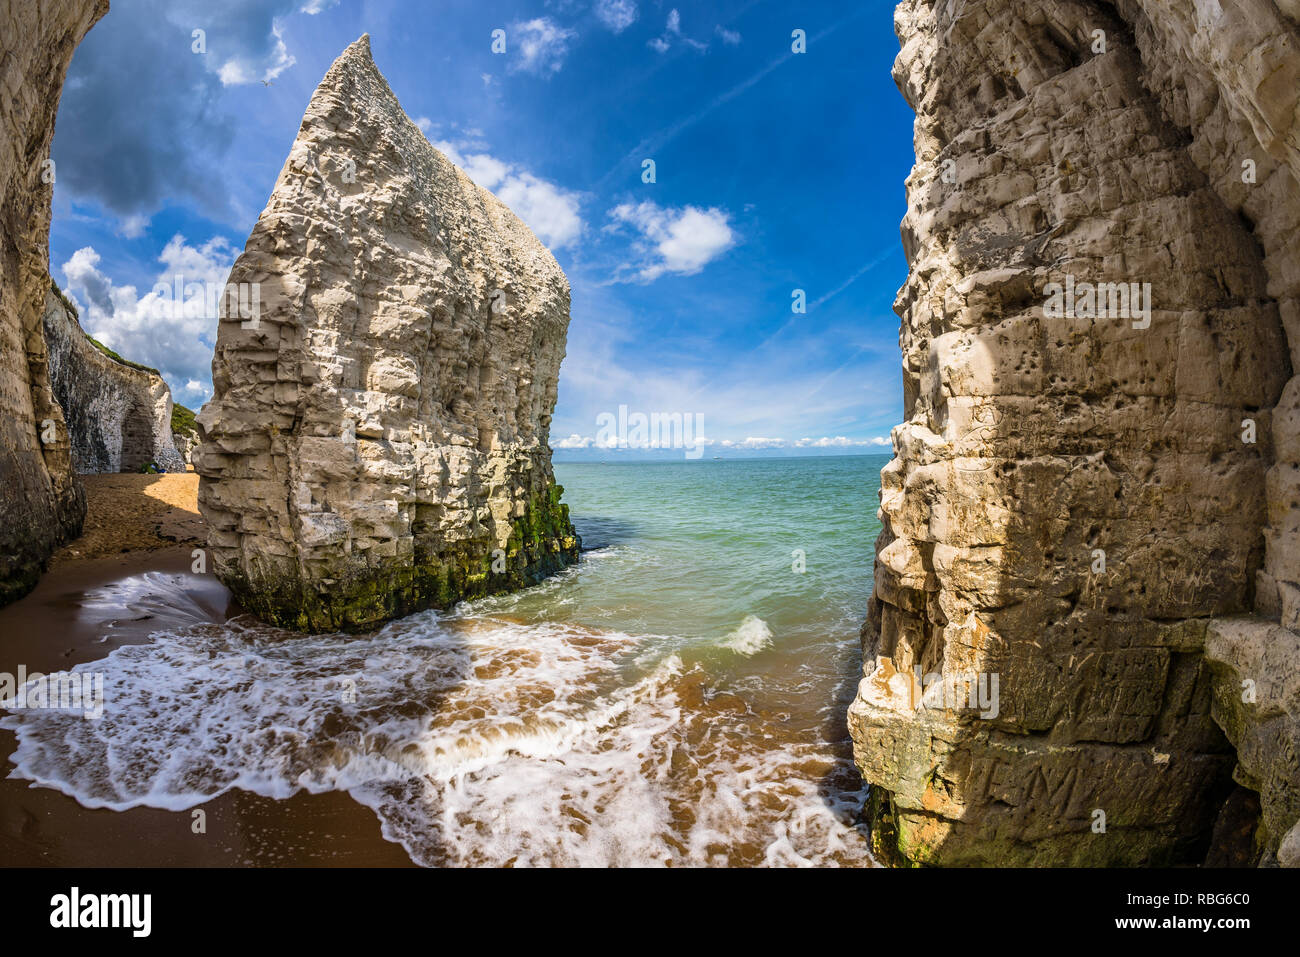 The beach and iconic cliffs at Botany Bay, near Margate and Broadstairs, Thanet District, East Kent, about 80 miles from London, England. Stock Photo